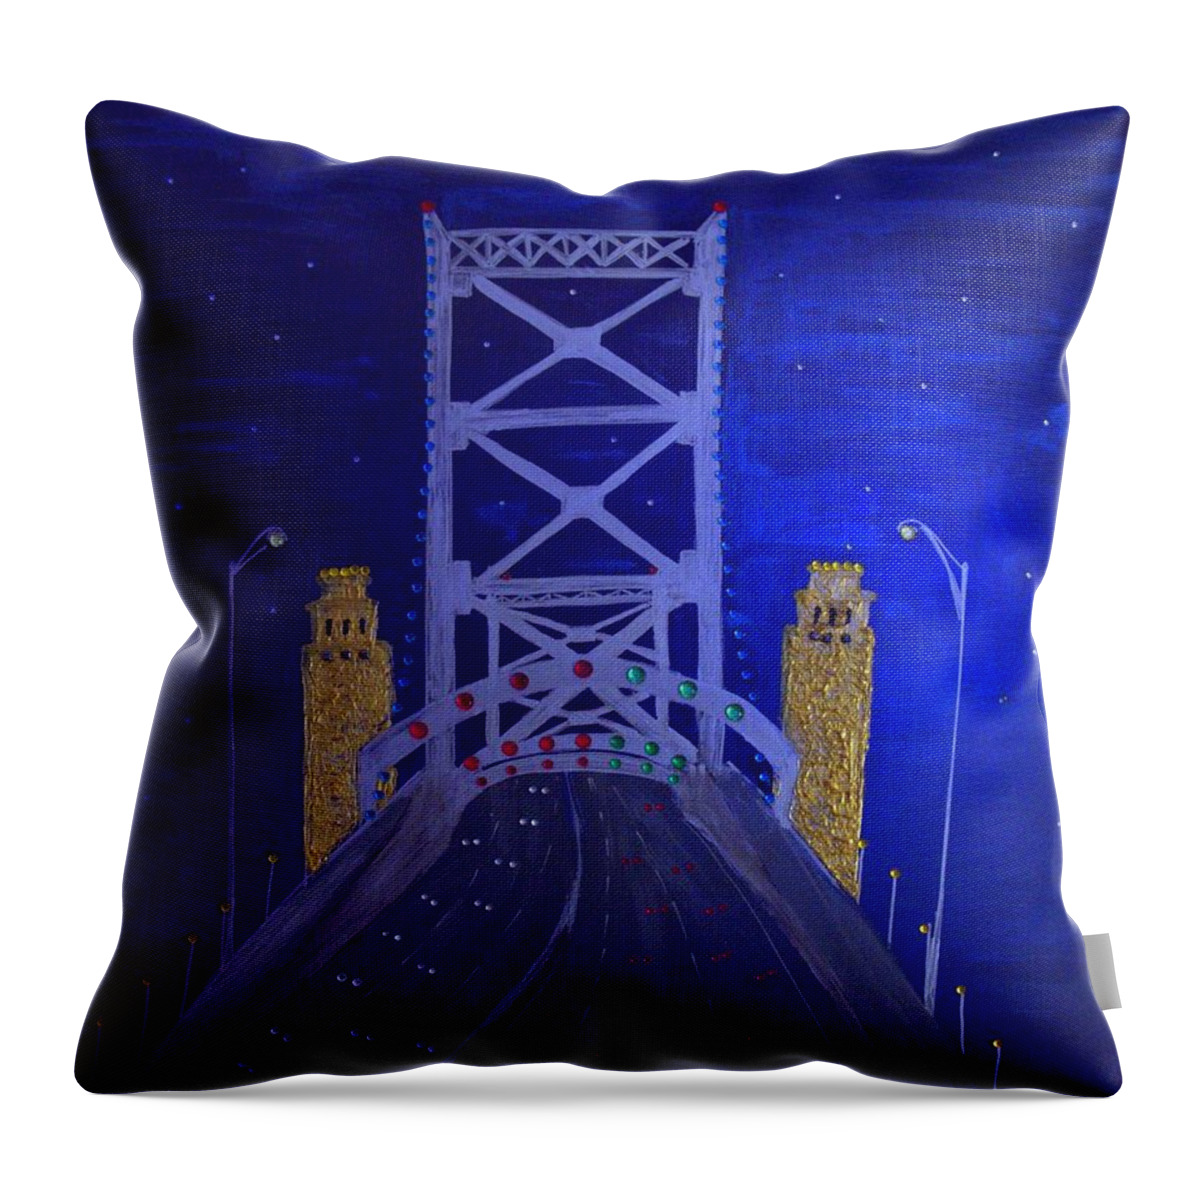  Throw Pillow featuring the painting Ben Franklin Bridge by Lilliana Didovic